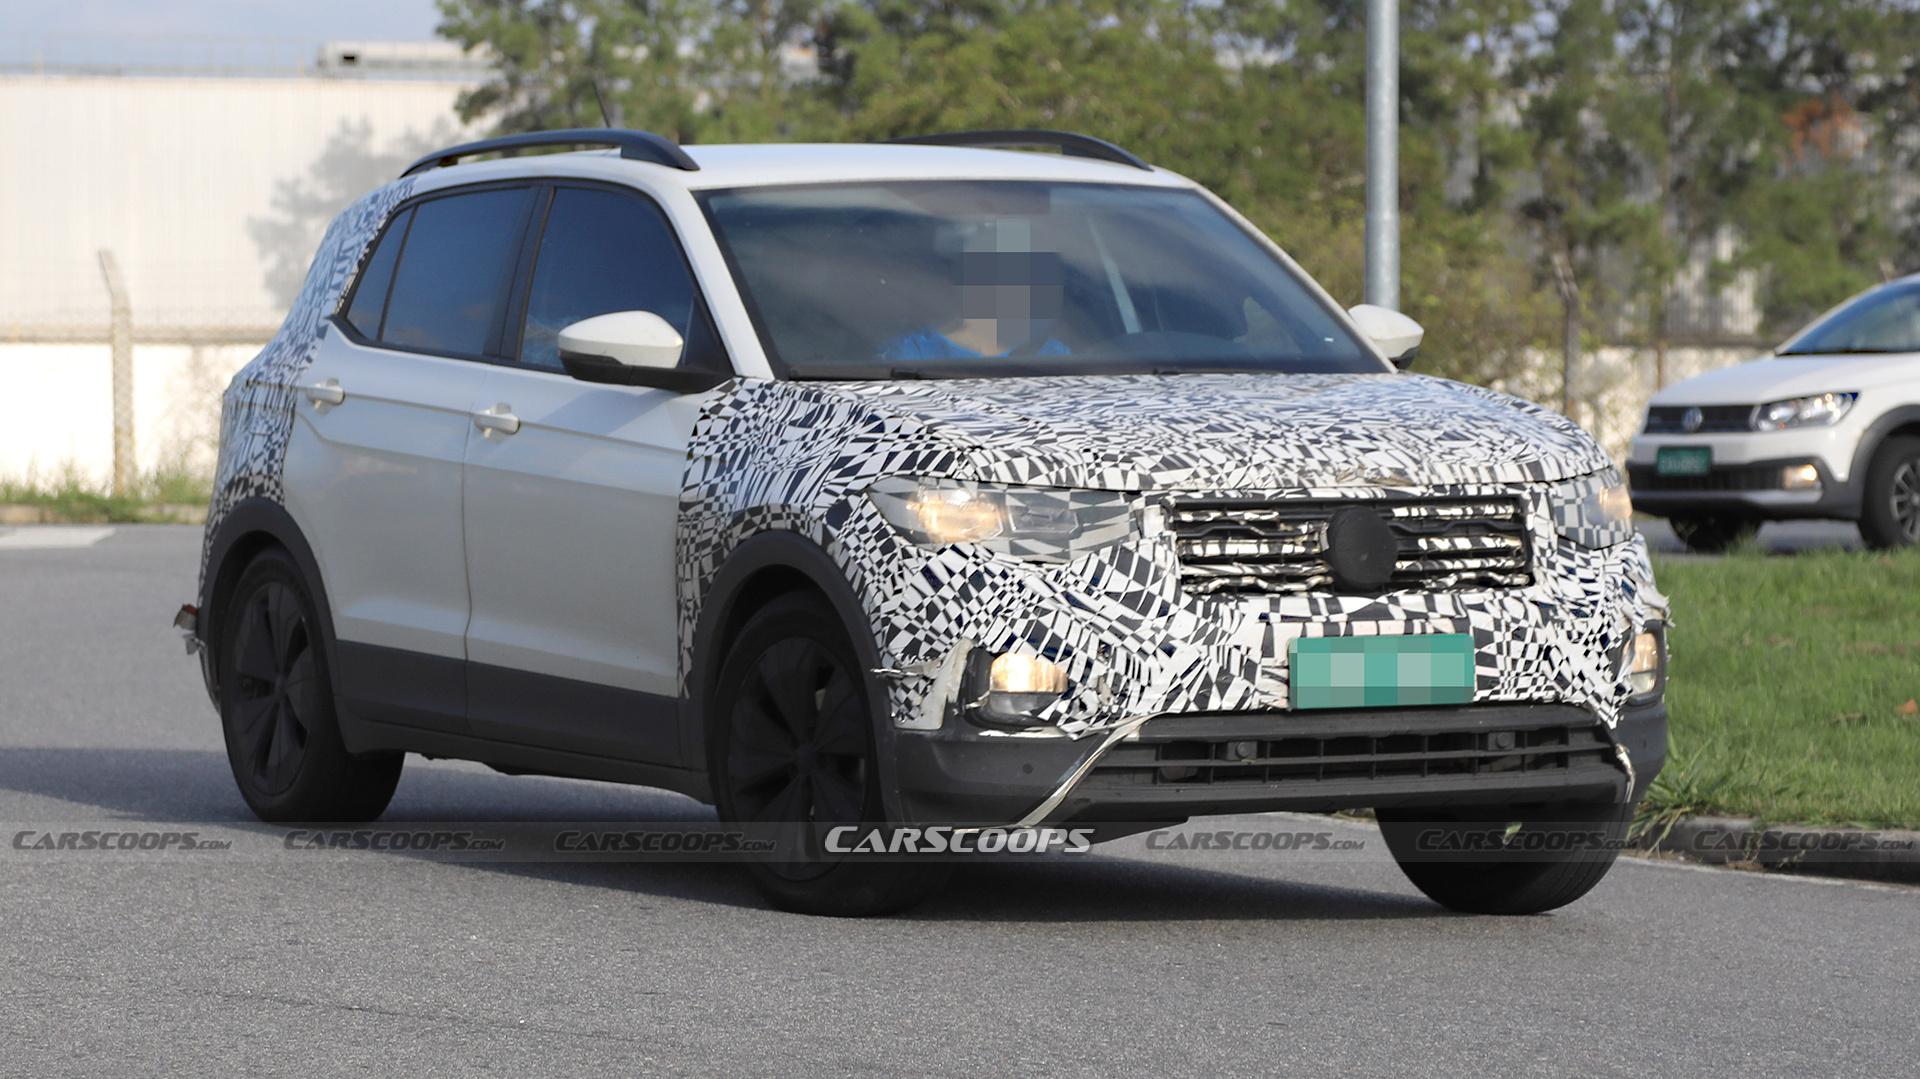  VW T Cross Getting Fresh Style But Familiar Engines Carscoops